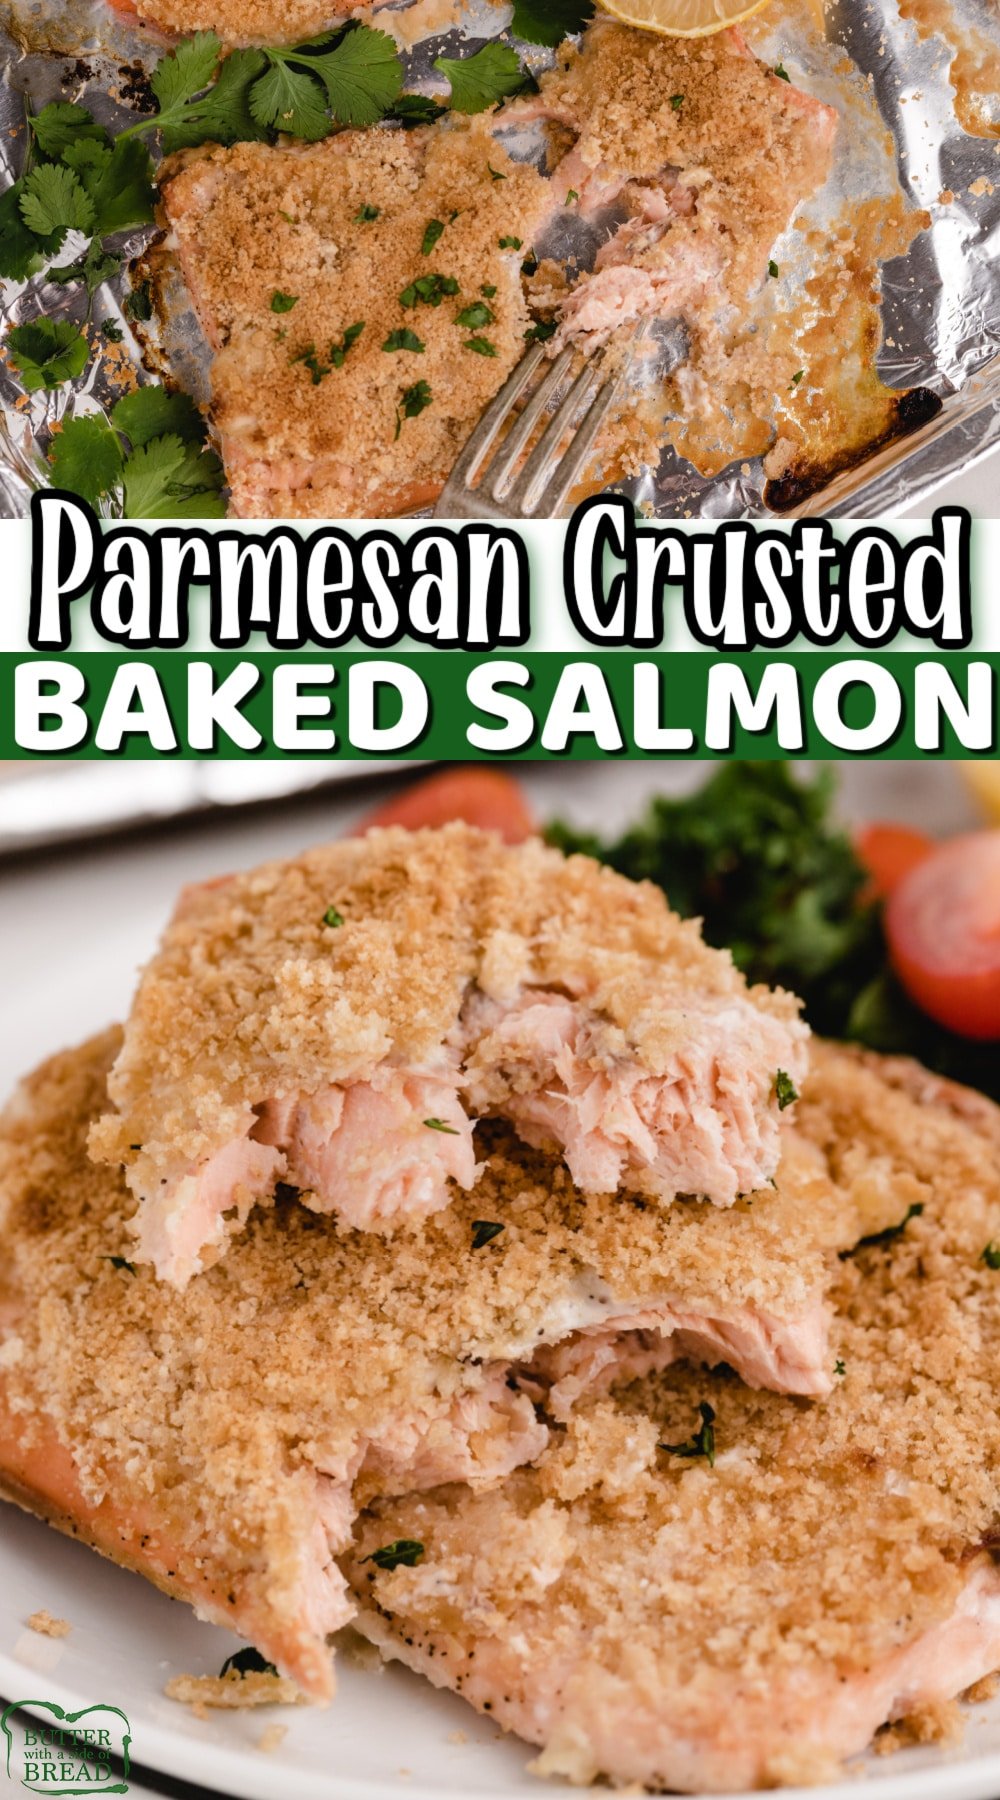 Parmesan Crusted Baked Salmon is moist, flaky, full of flavor and so simple to prepare! Only a few ingredients are needed to make this easy salmon recipe.